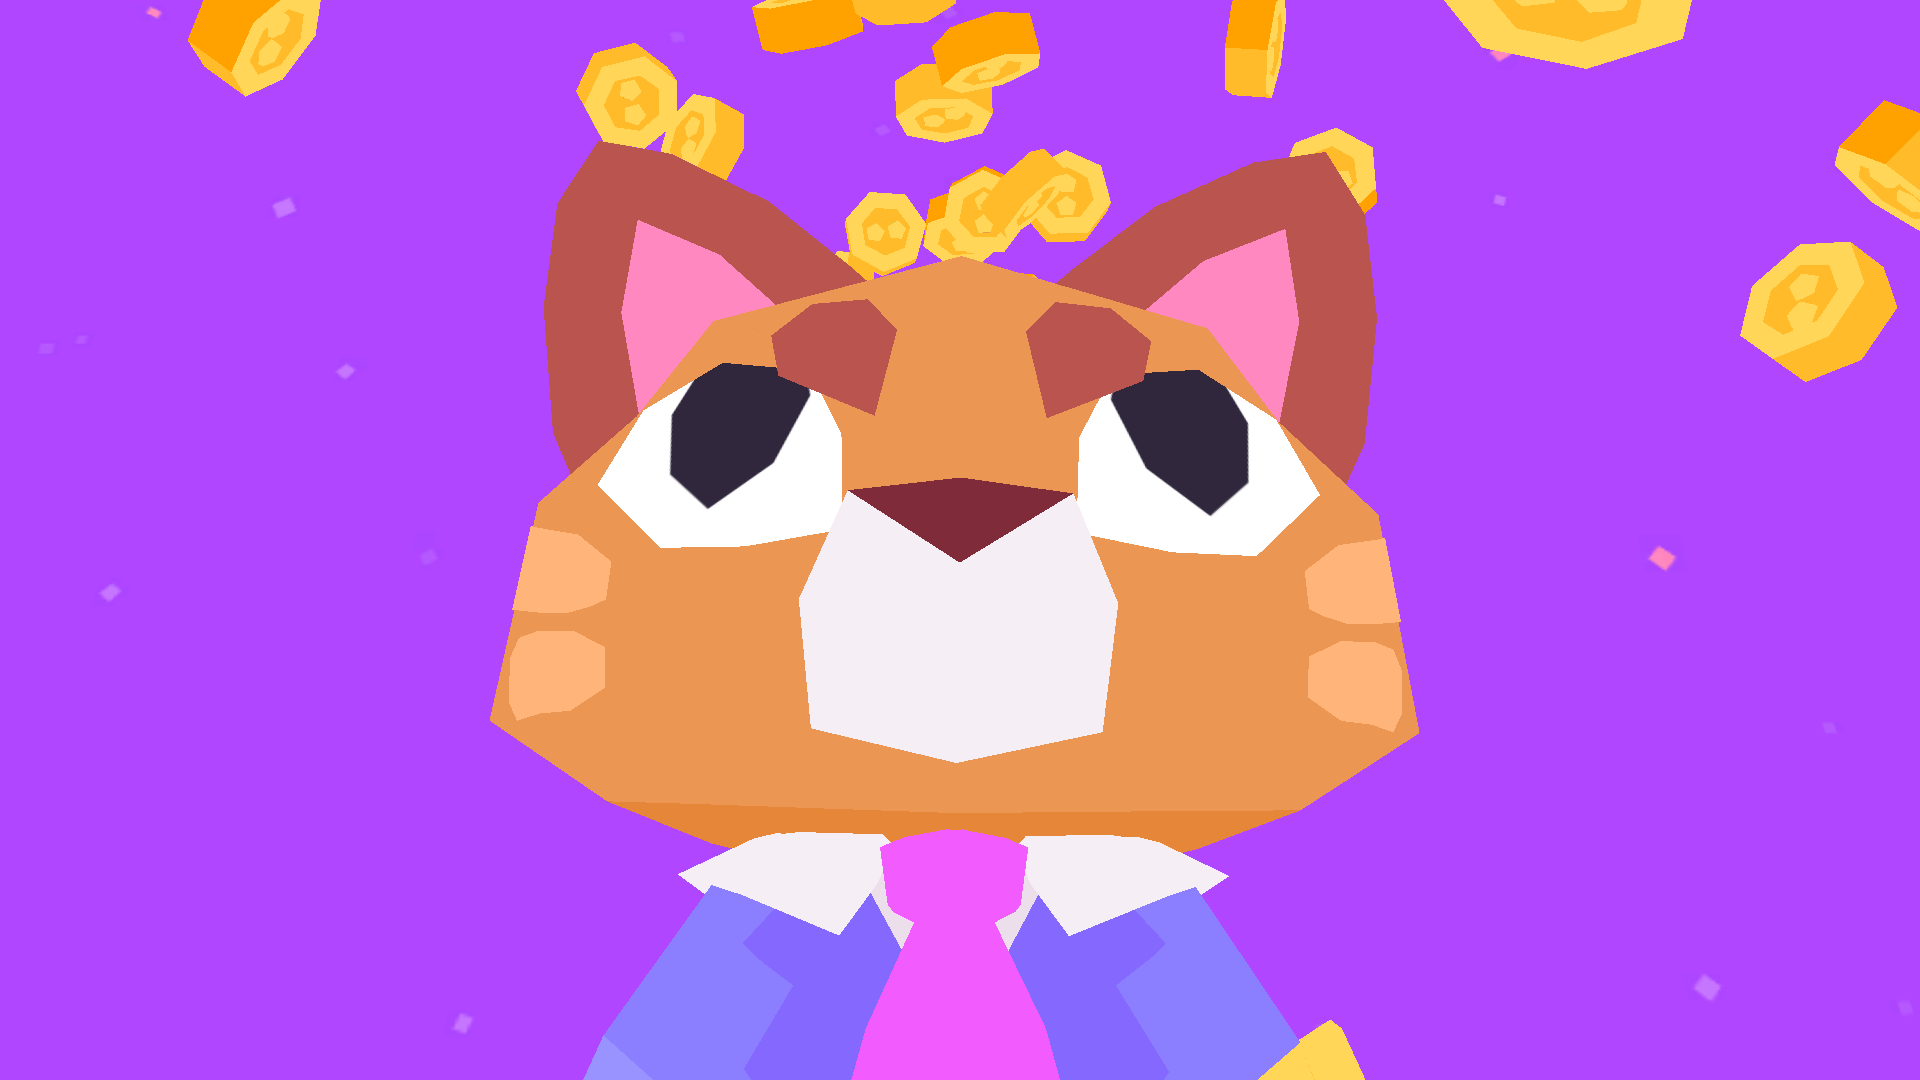 An image of Button City's antagonist on a purple background with money raining behind him